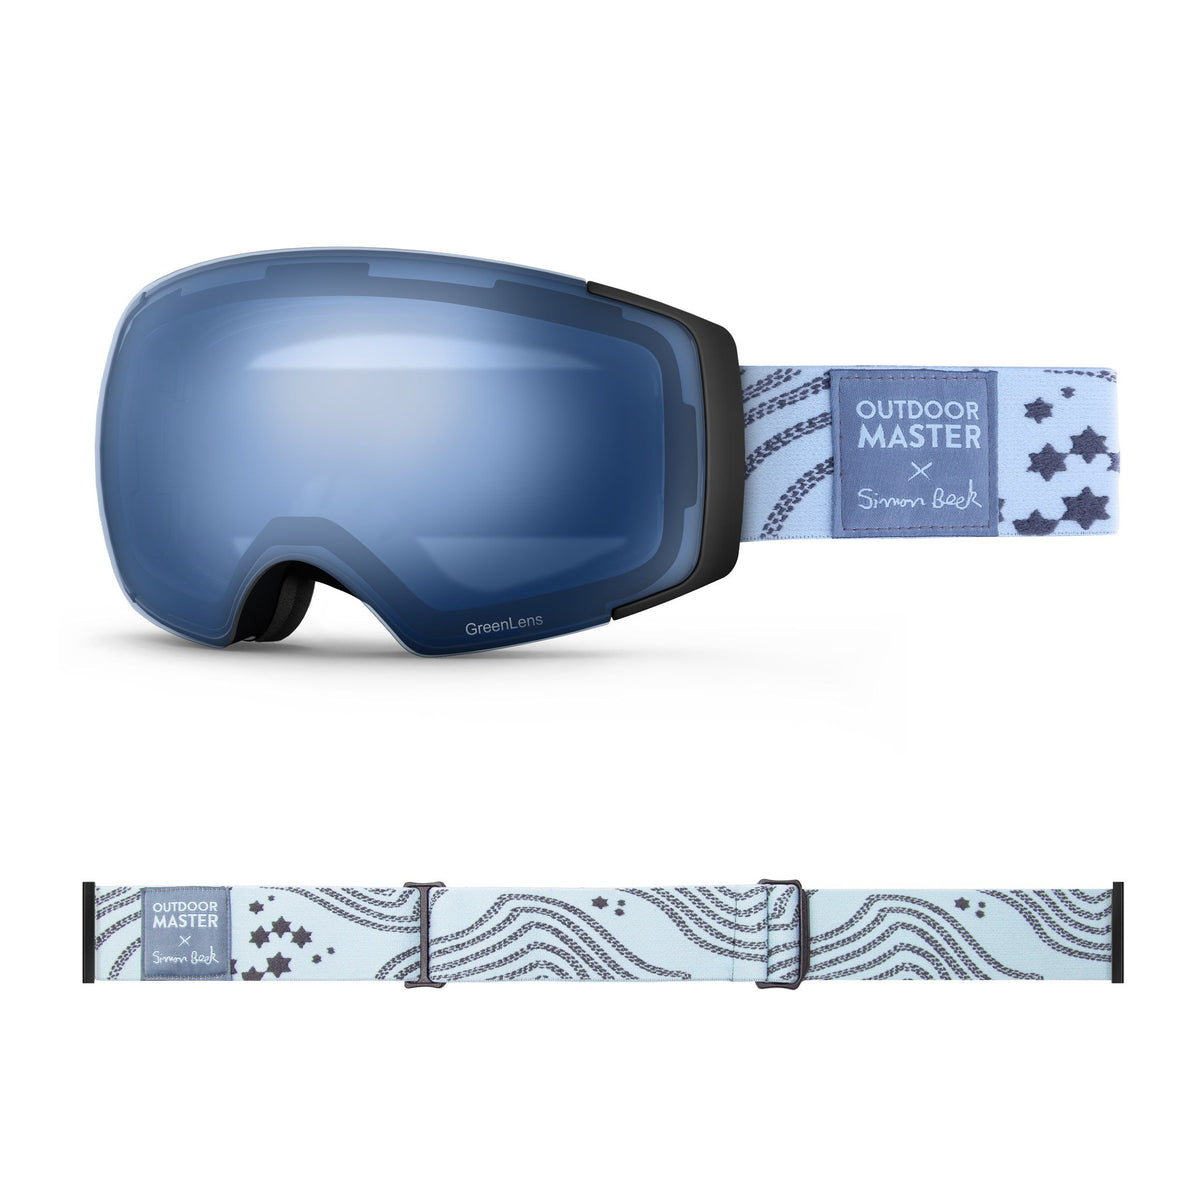 OutdoorMaster x Simon Beck Ski Goggles Pro Series - Snowshoeing Art Limited Edition OutdoorMaster GreenLens VLT 60% TAC Blue Polarized Star Road-Lightsteelblue